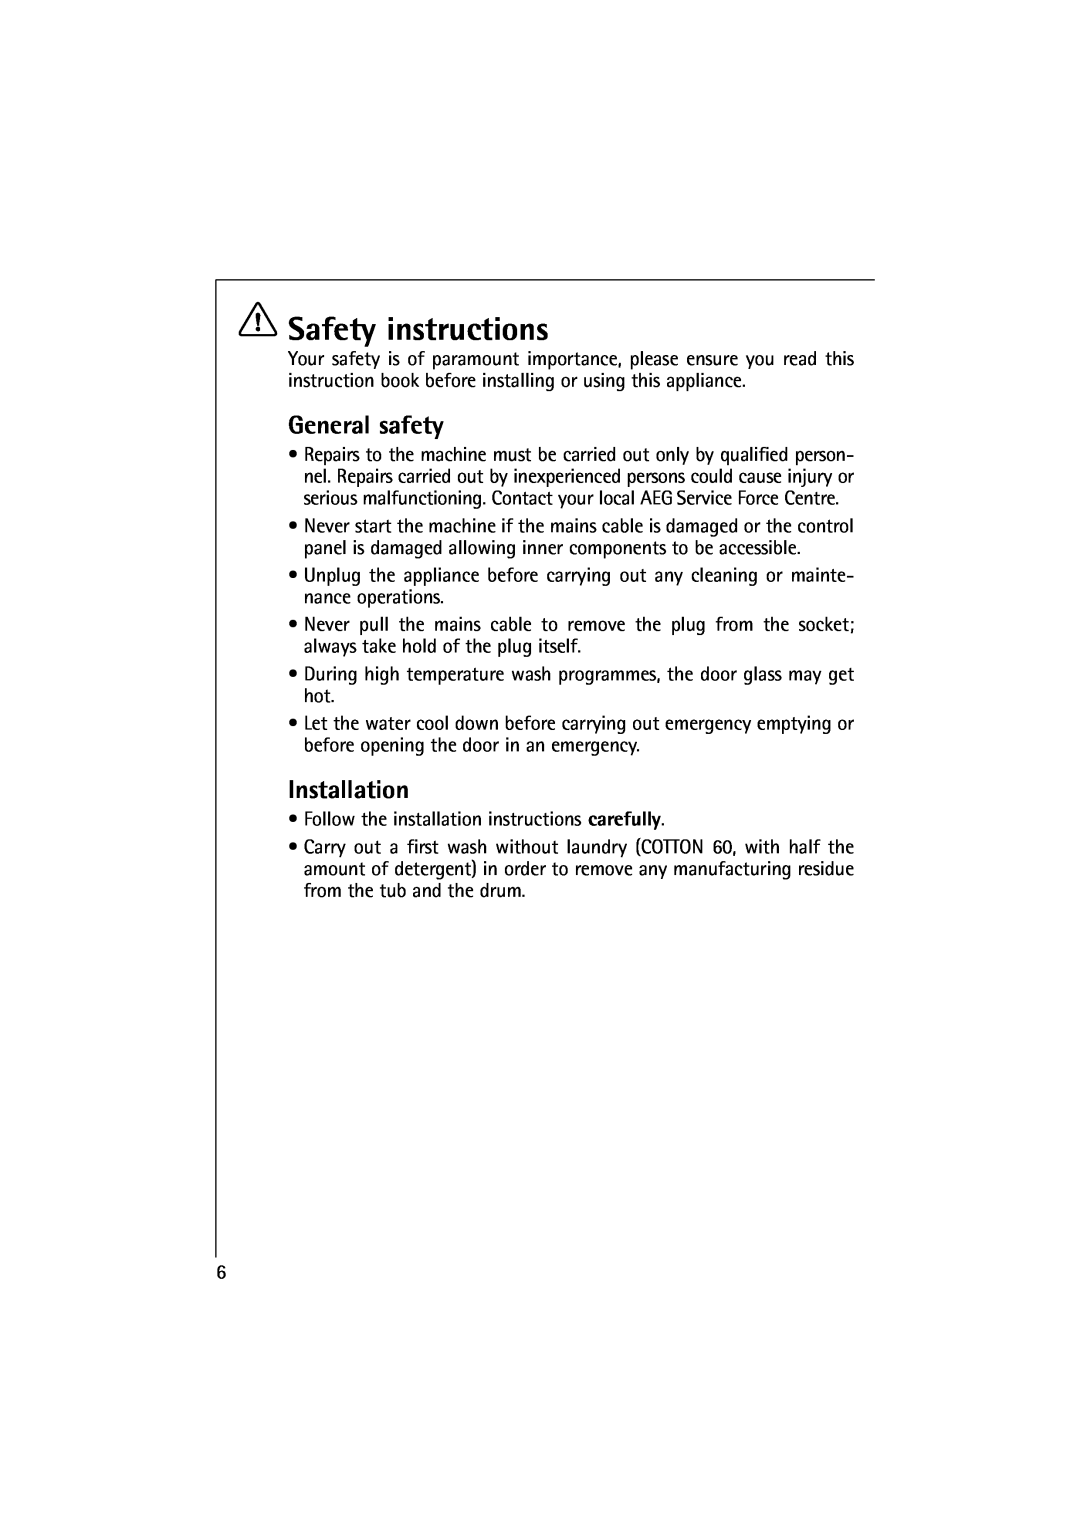 Electrolux 10500 VI manual Safety instructions, General safety, Installation 